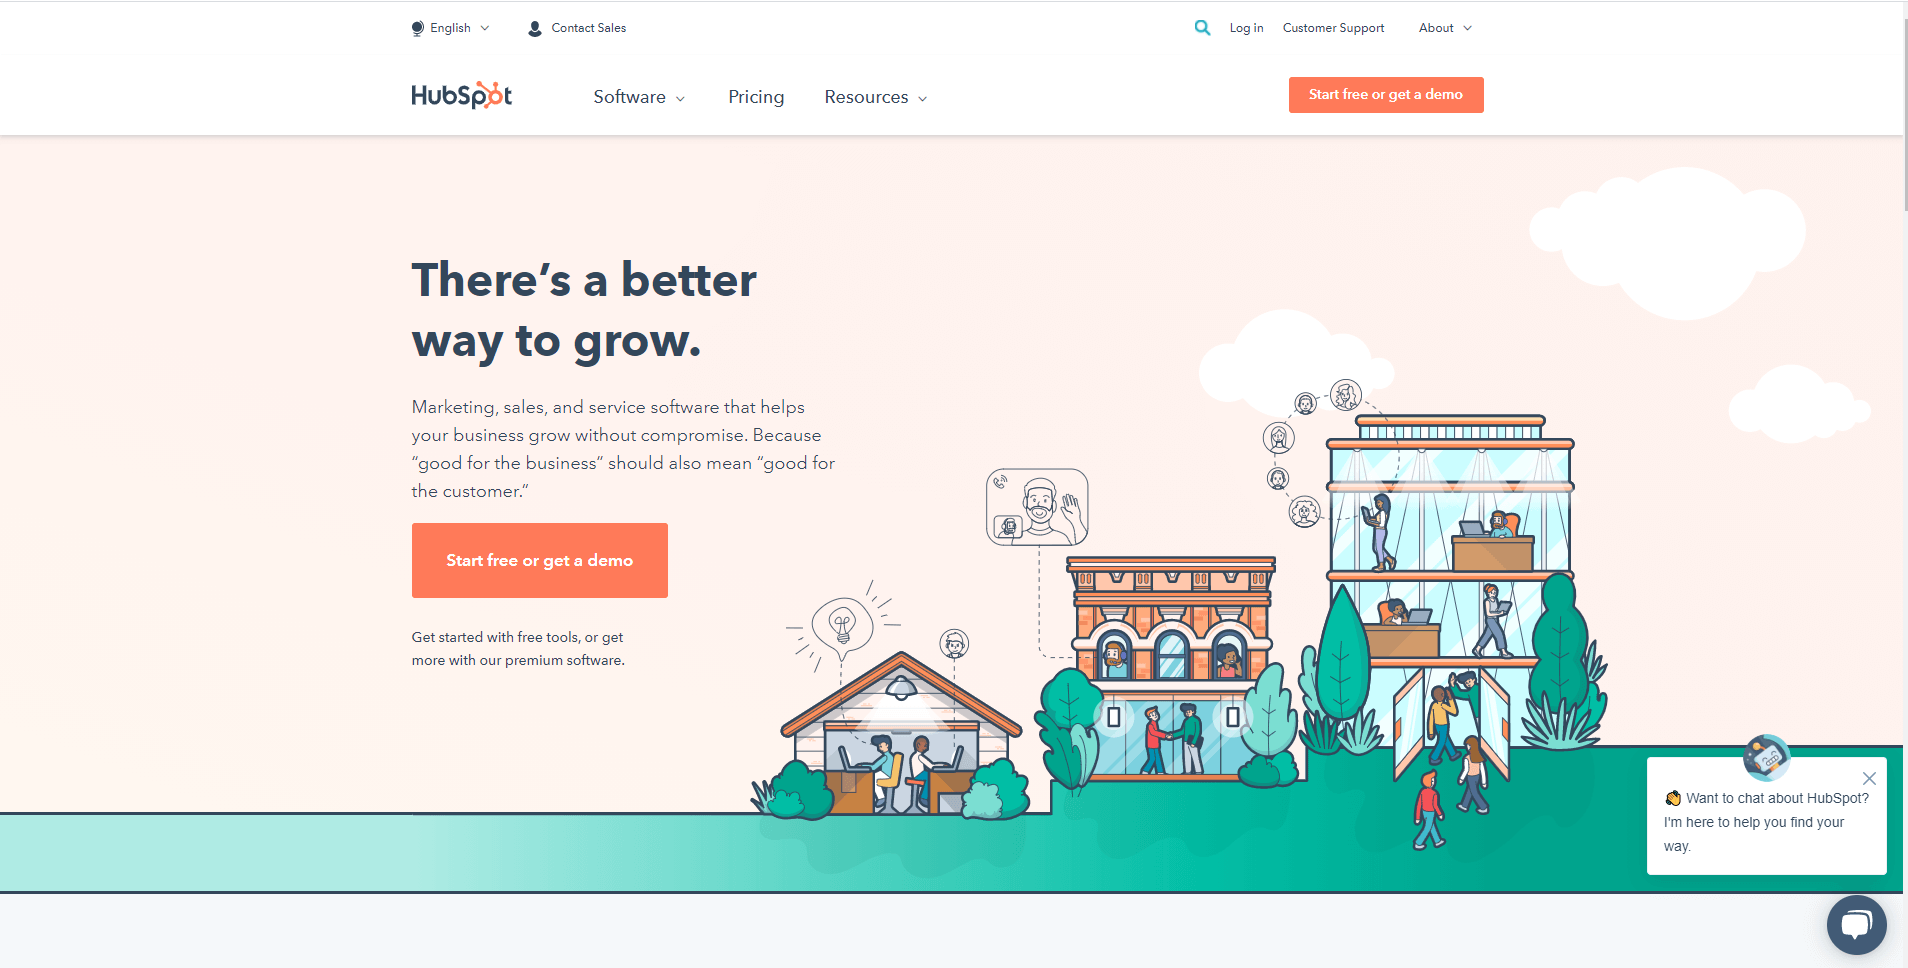 Hubspot uses a large hero section with an image and calls to action. web design trends